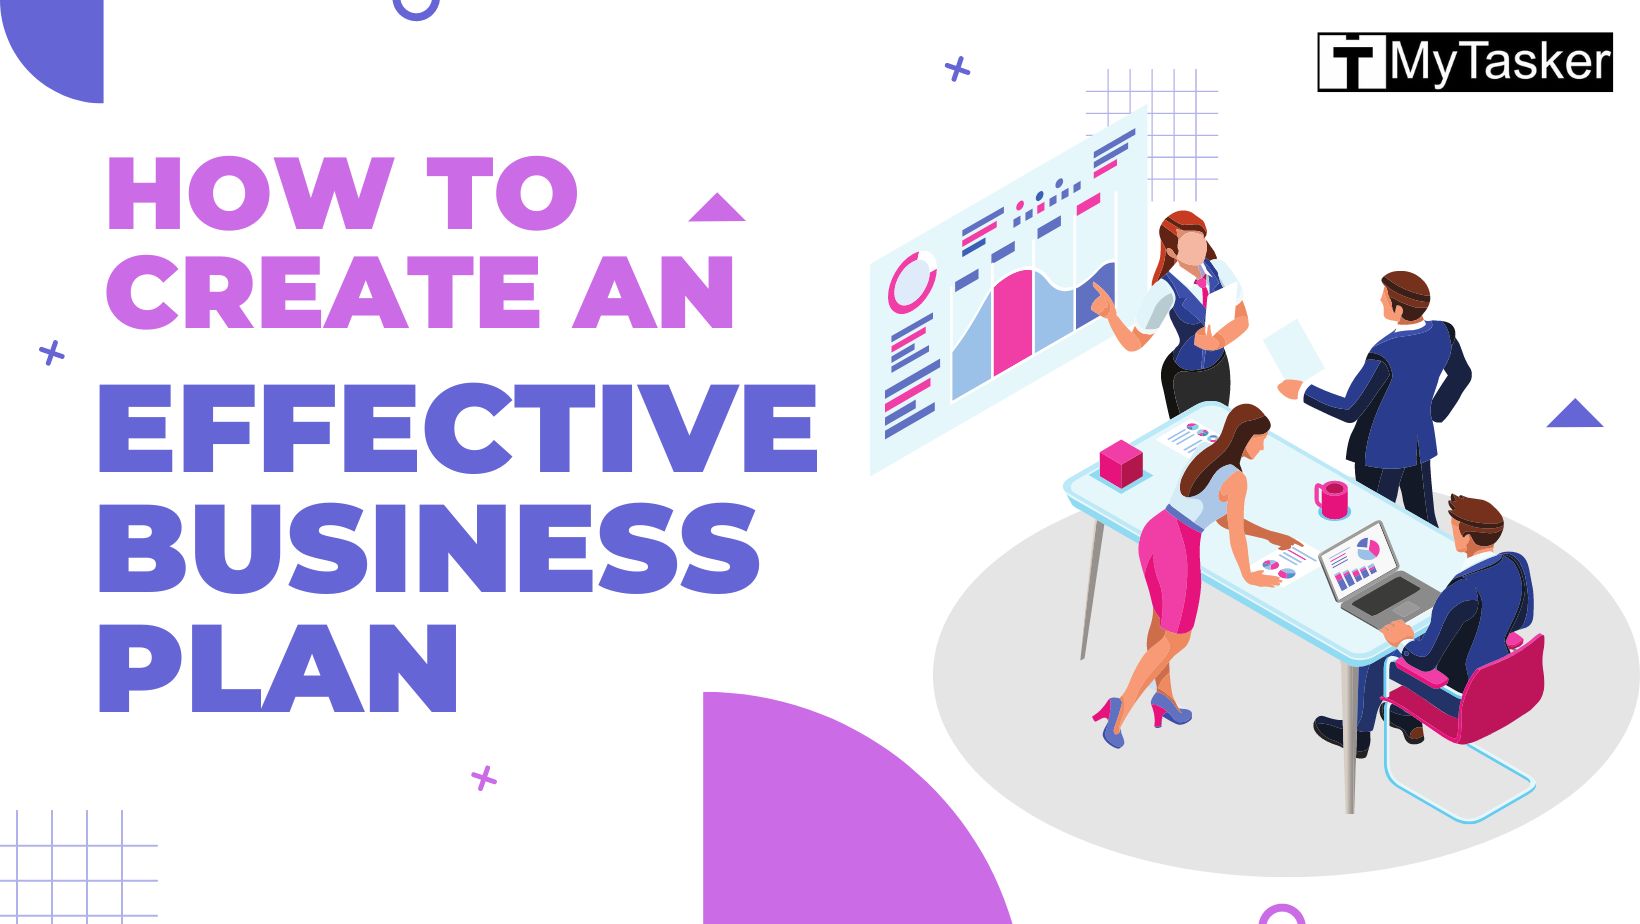 How to Create an Effective Business Plan: Step-By-Step Guide